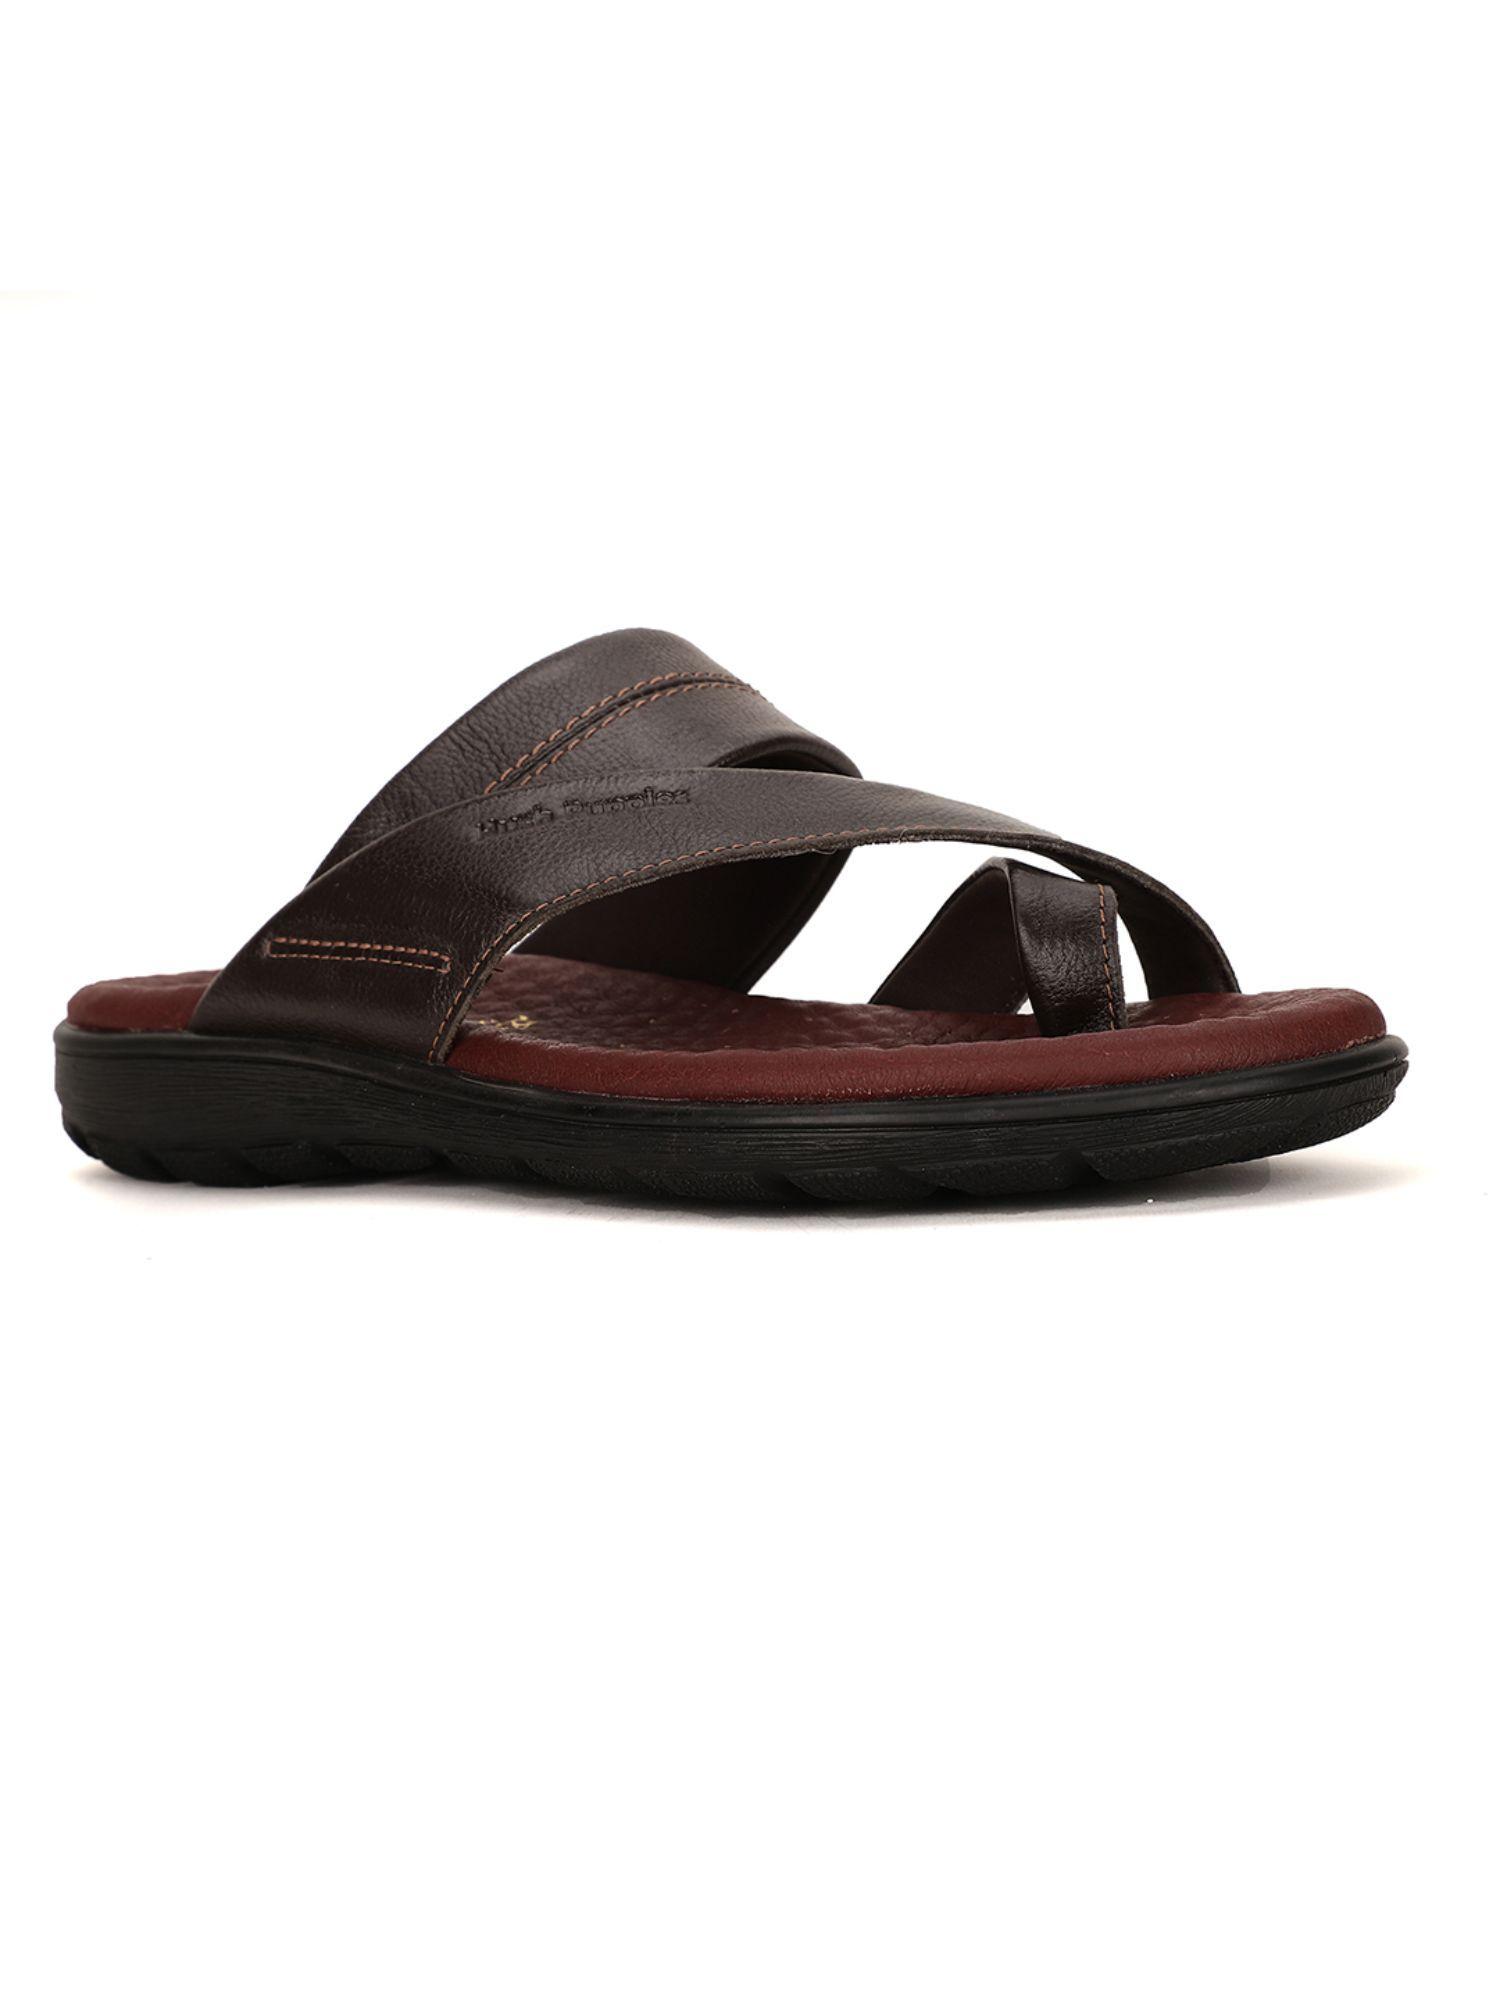 mens-brown-slip-on-casual-sandals